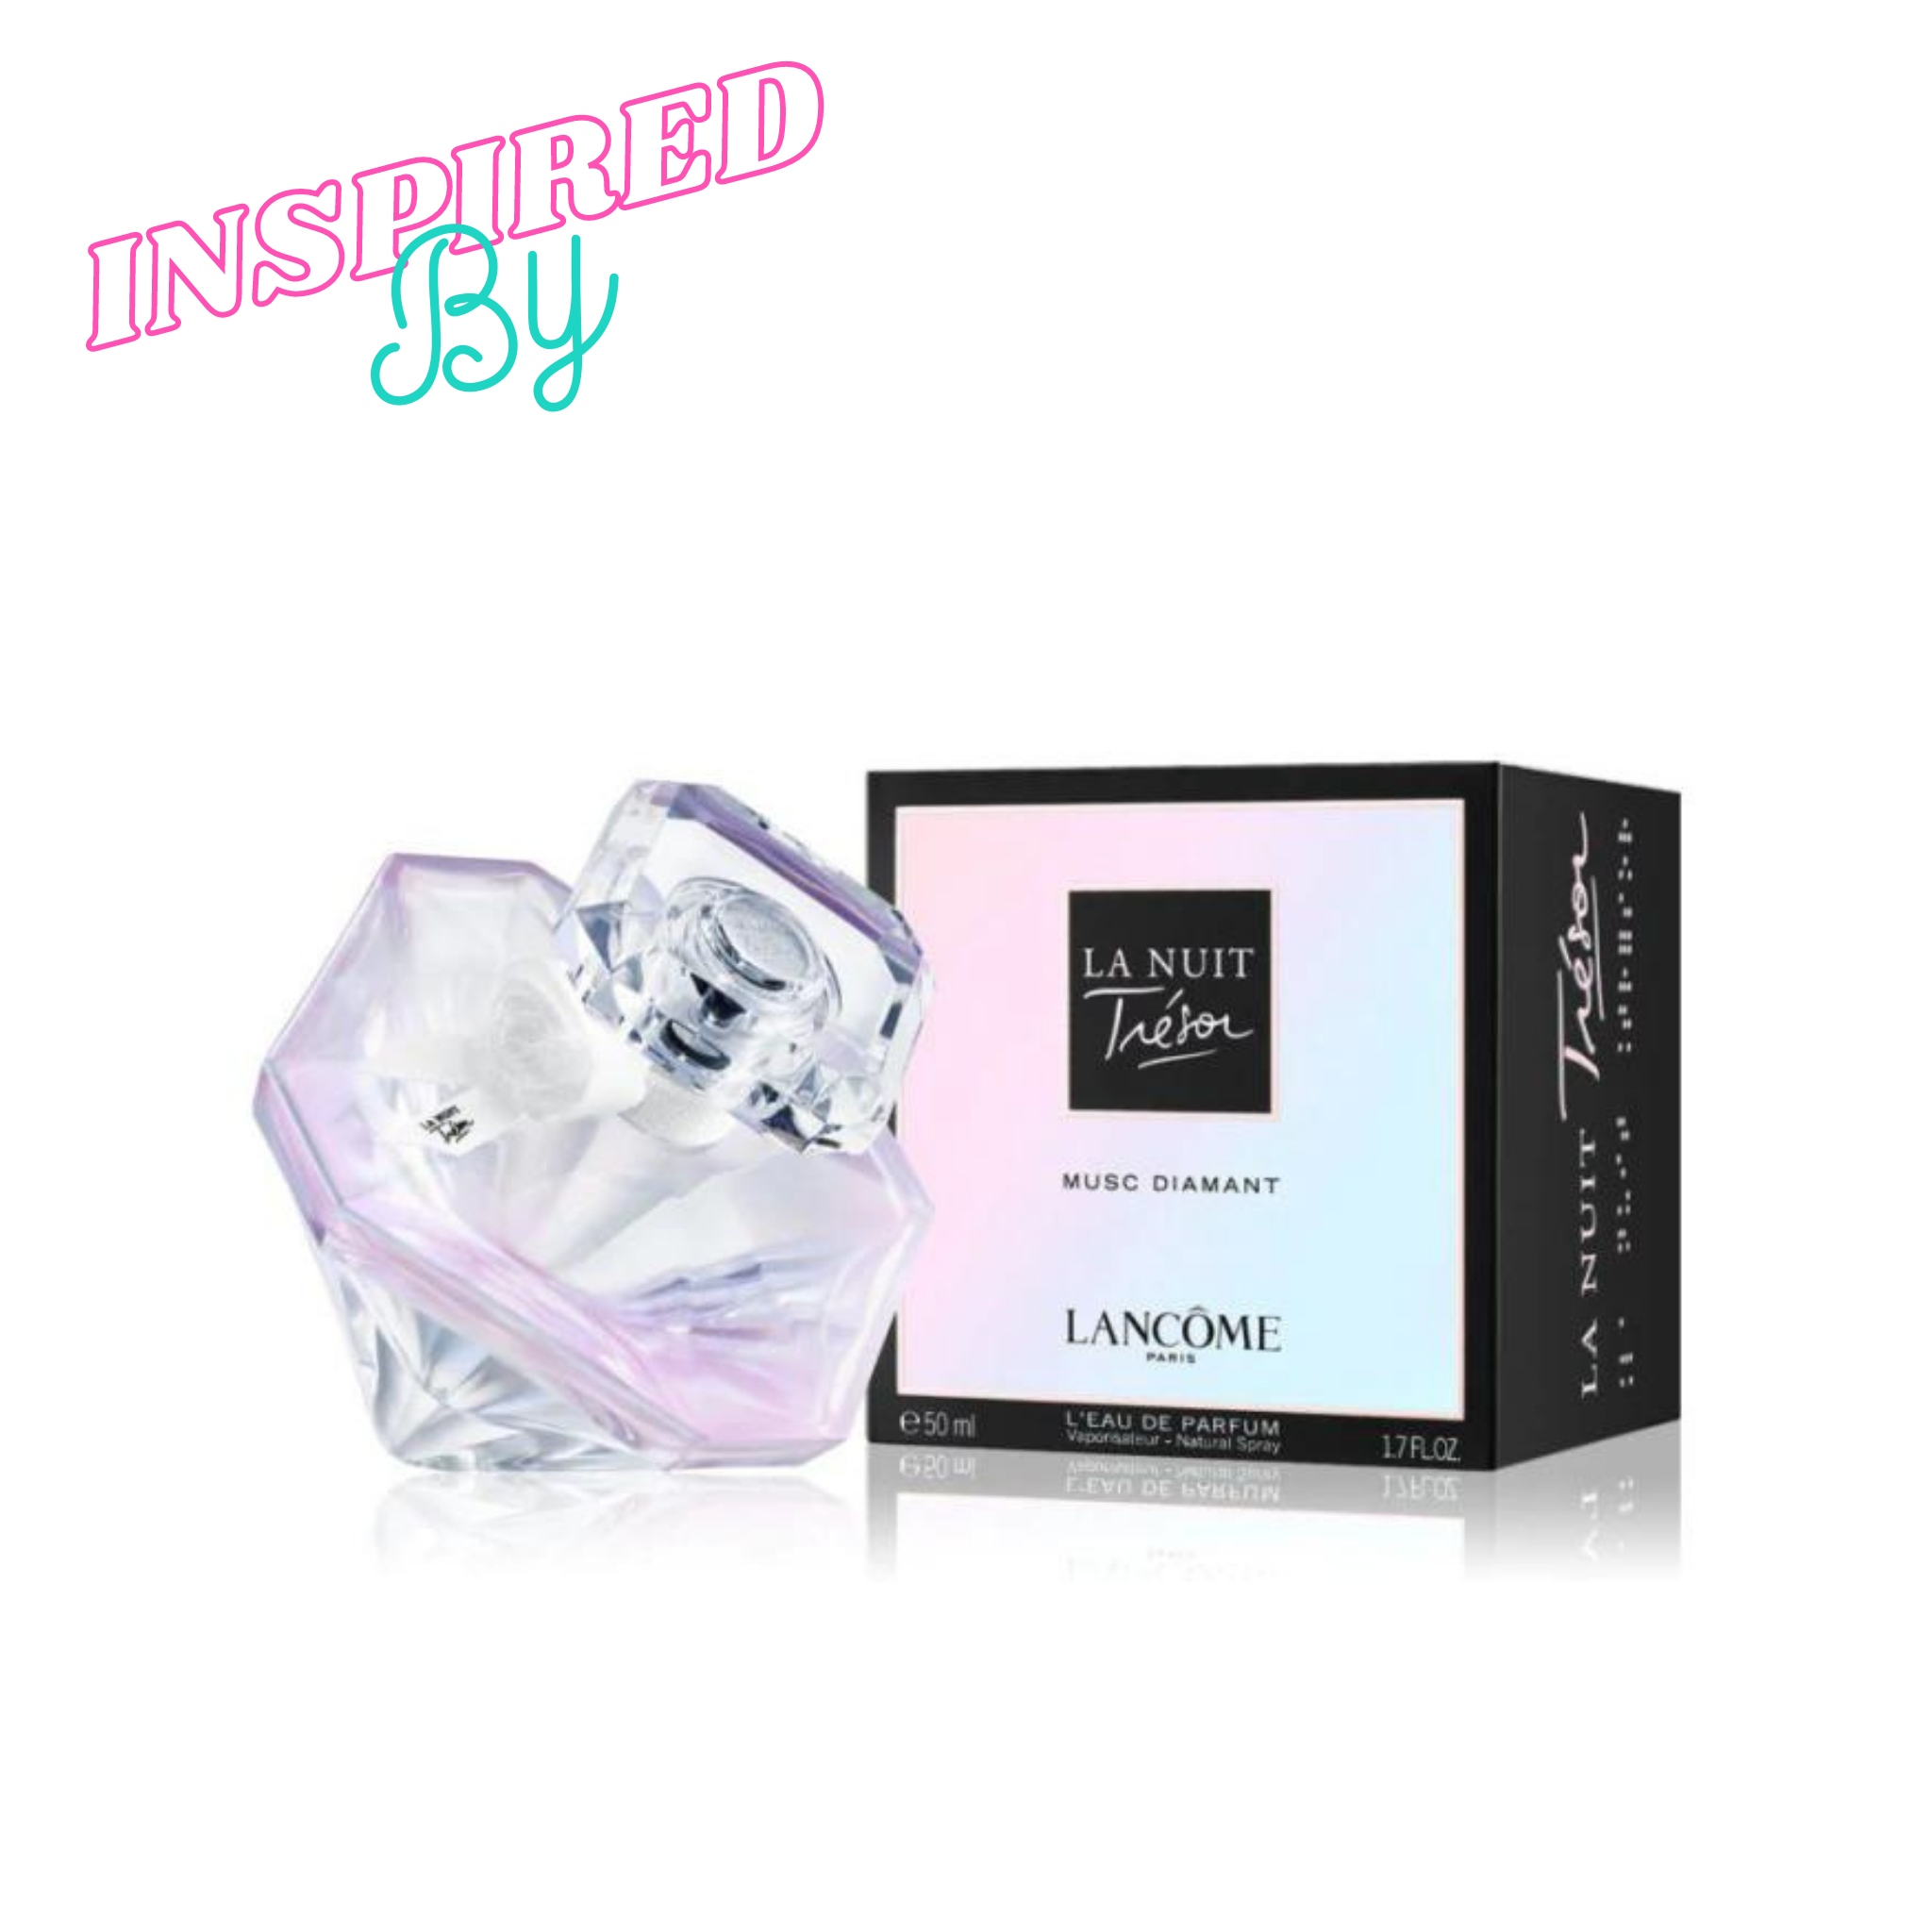 Inspired by Lancome La Nuit Tresor Musc Diamant 100ml - Fragrance Deliver SA